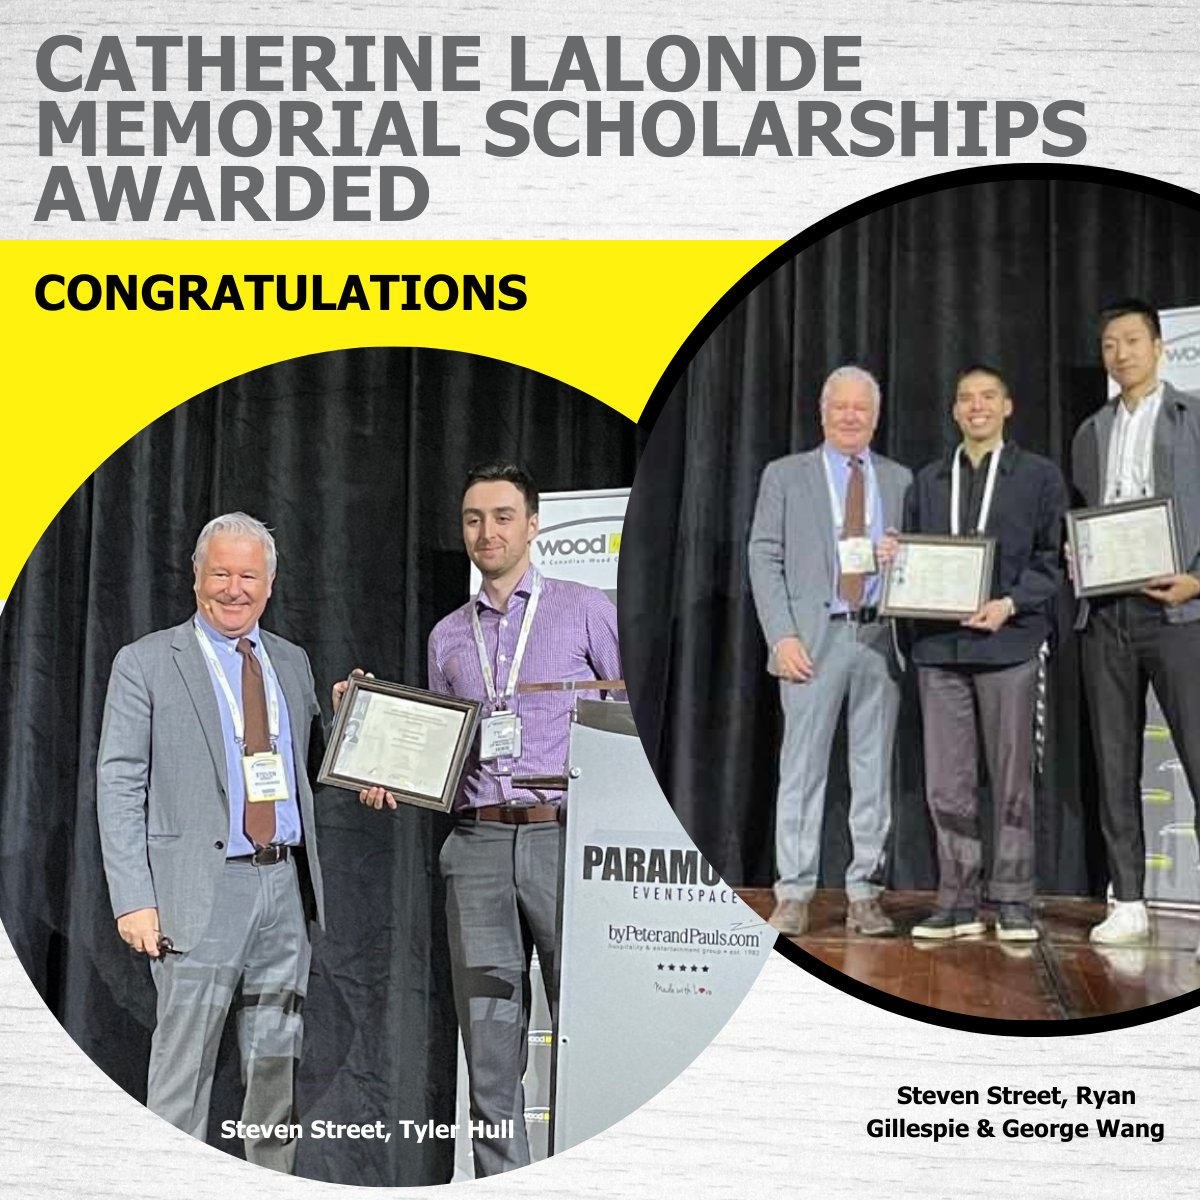 Today we awarded the Catherine Lalonde Memorial Scholarships to Mahboobeh Fakhrzarei @UAlberta, Tyler Hull @UWaterloo & Ryan Gillespie & George Wang @UofTDaniels. Recipients’ submissions exemplify the level of enthusiasm & expertise that Catherine inspired within our industry